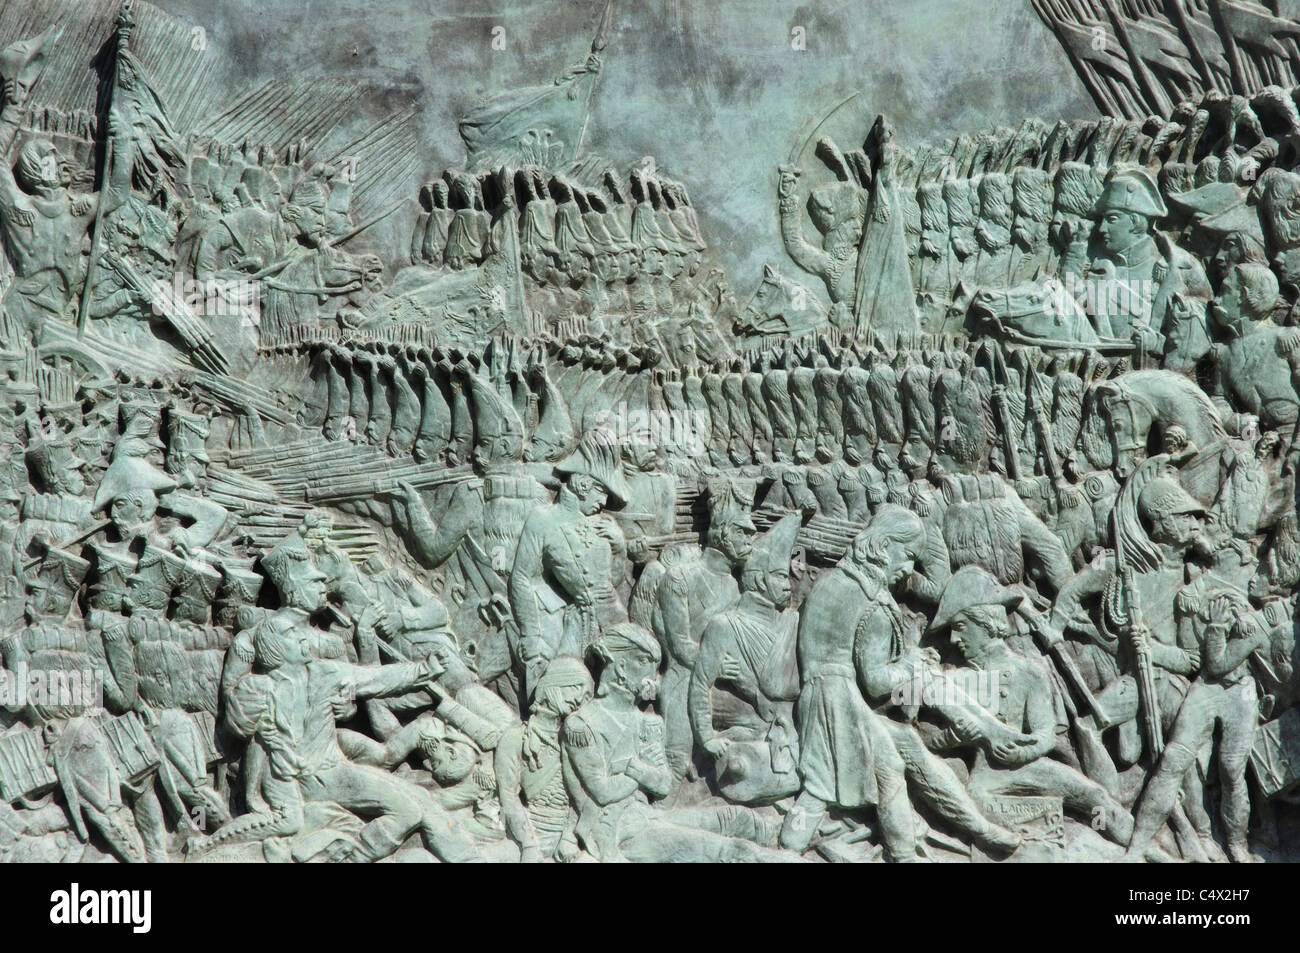 A scene from the Battle of Austerlitz carved on a bronze plaque at the church Val de Grace in Paris Stock Photo